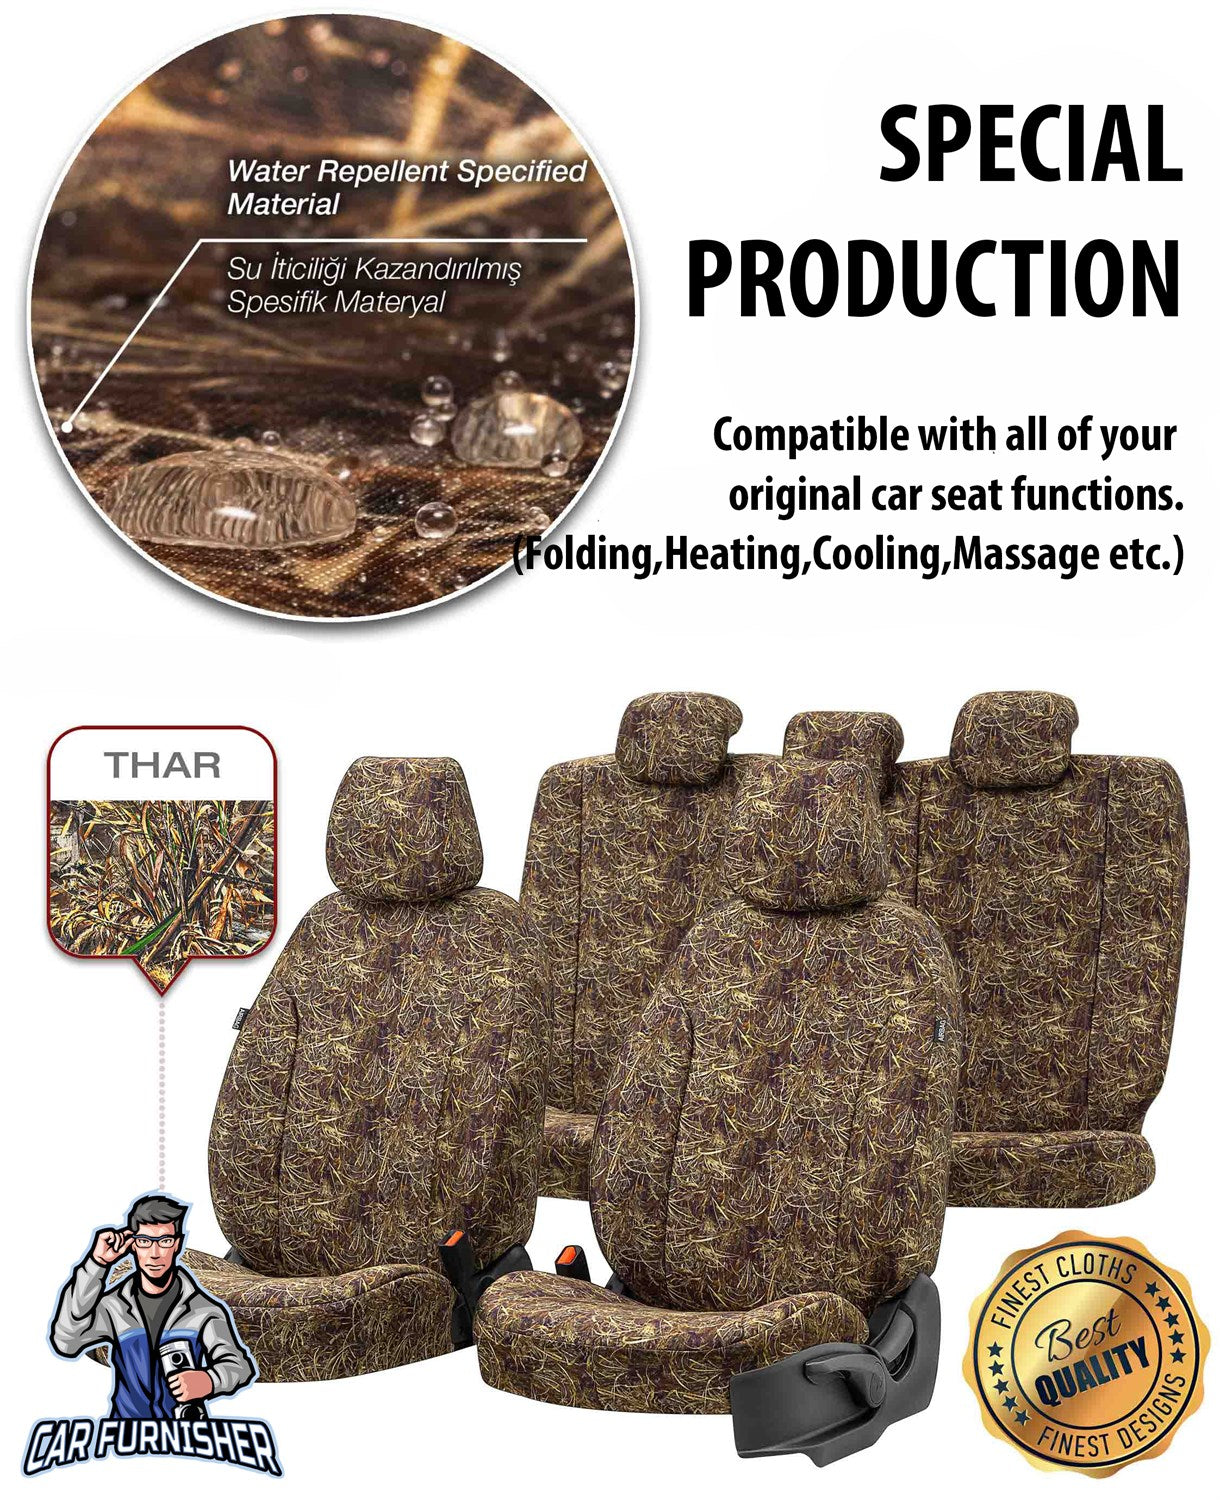 Renault Scenic Car Seat Covers 1997-2016 Camouflage Design Mojave Camo Full Set (5 Seats + Handrest) Fabric